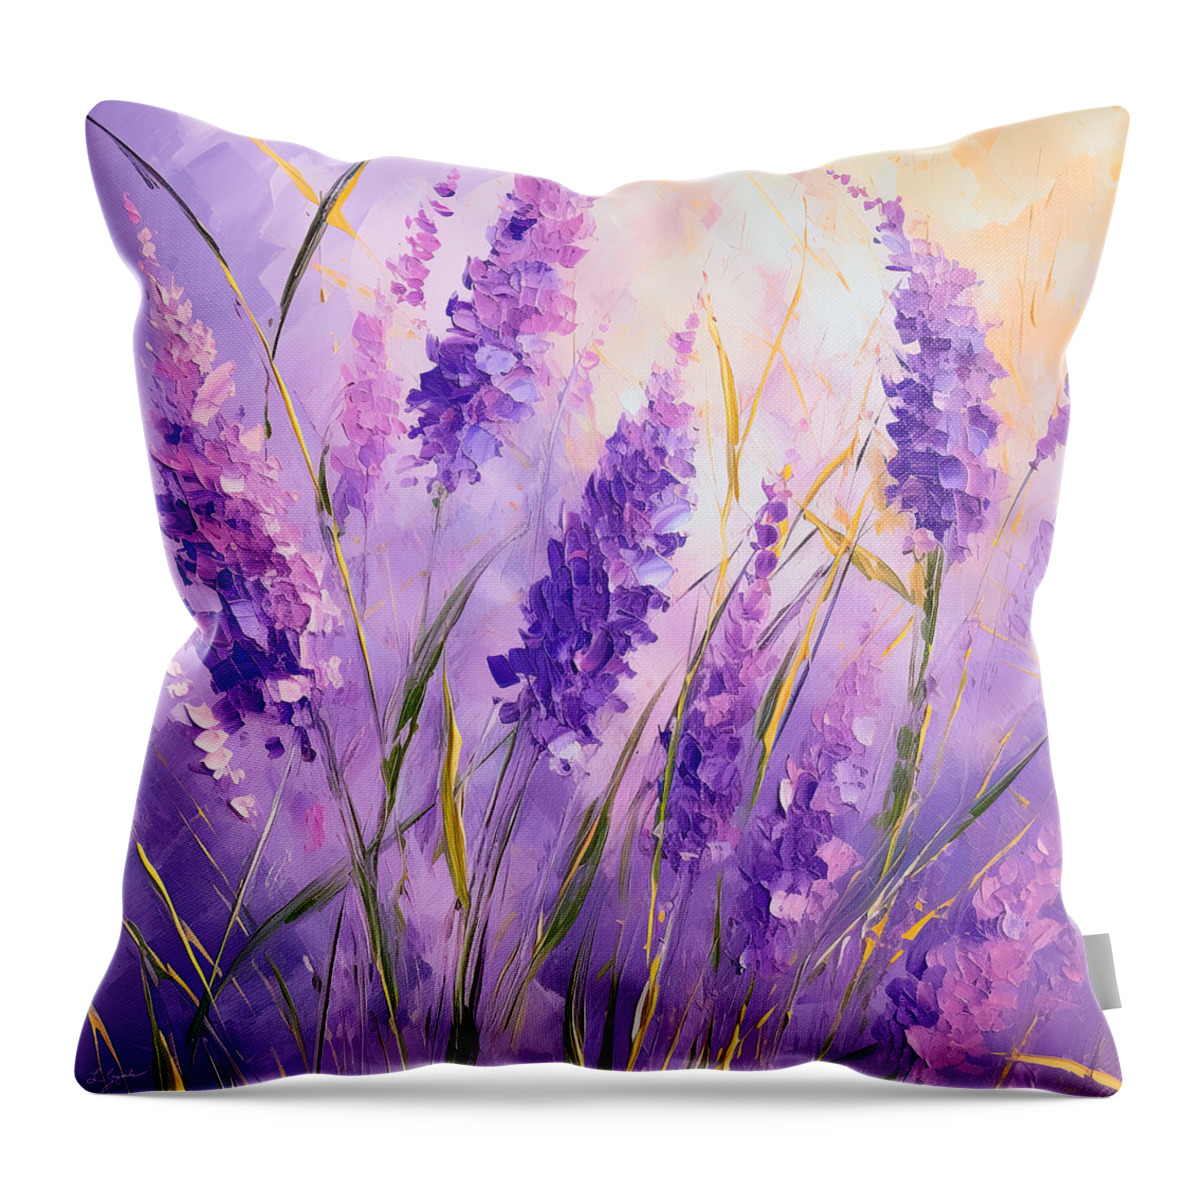 Lavender Throw Pillow featuring the painting Lavender Impression - Lavender Flowers Art by Lourry Legarde